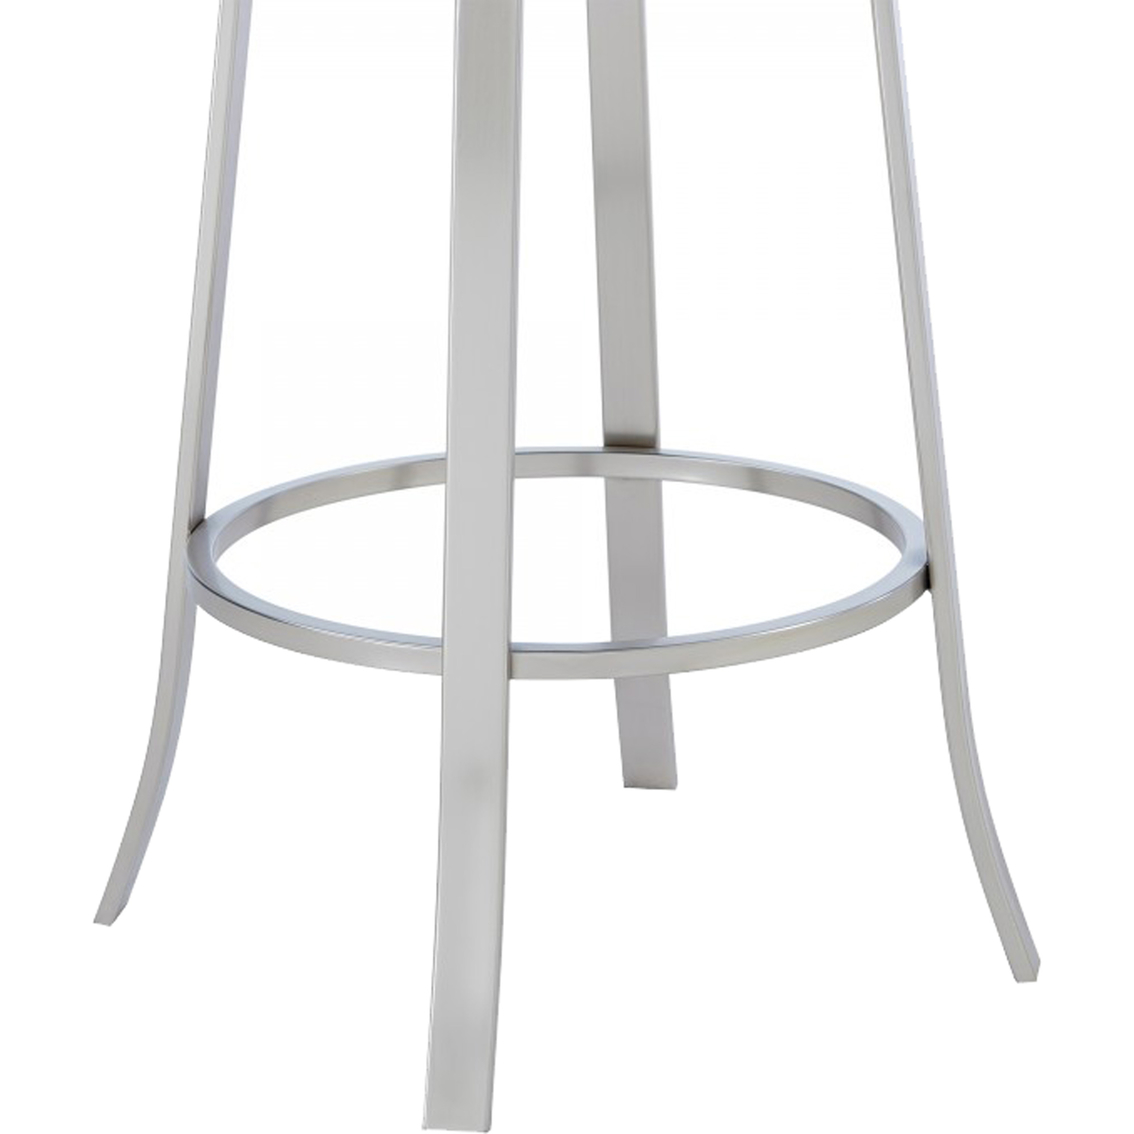 Armen Living Lola Barstool in Brushed Stainless Steel Finish and Grey Faux Leather - Image 6 of 7